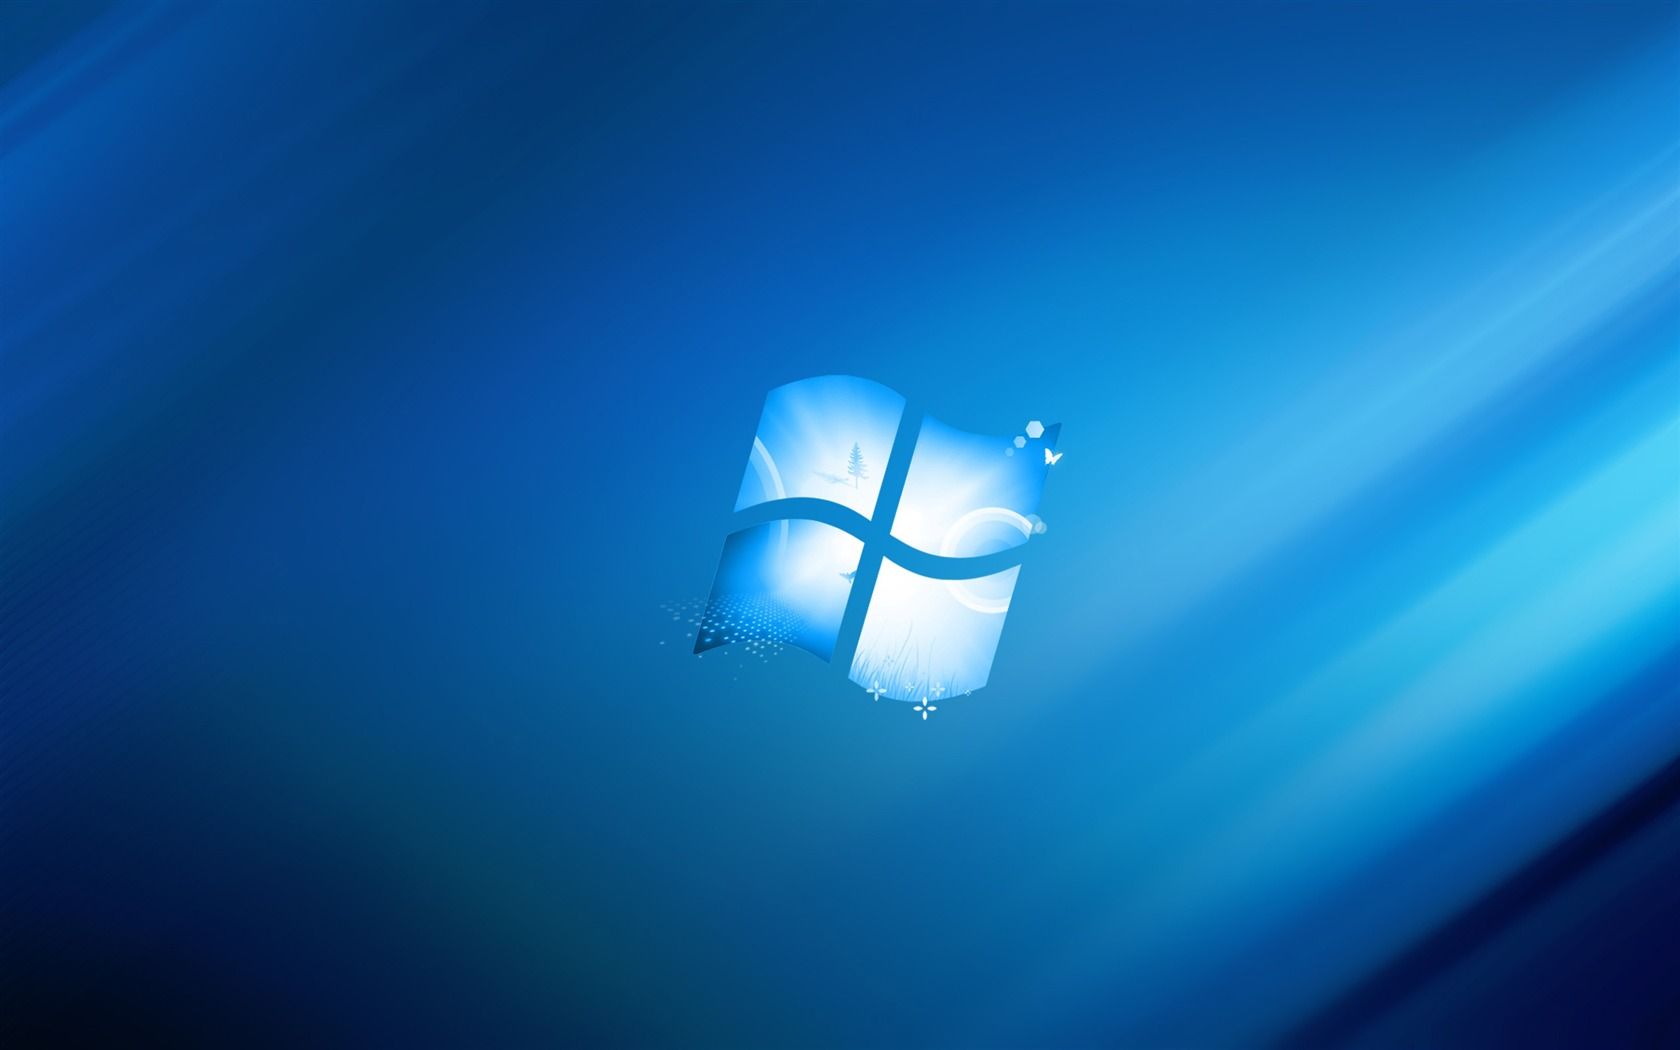 Undefined Microsoft Puter Wallpaper Adorable